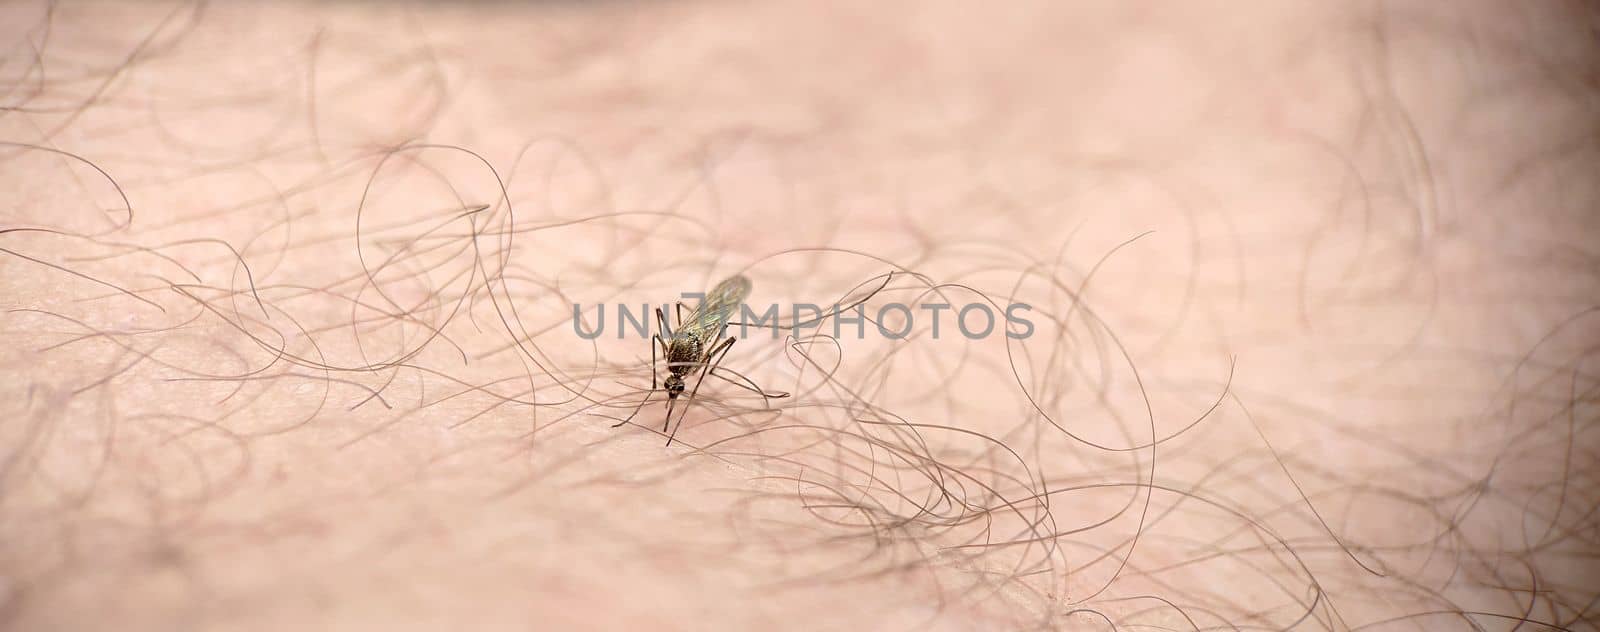 Macrophotography.A mosquito drinks human blood close-up outdoors. Texture or background.Selective focus.